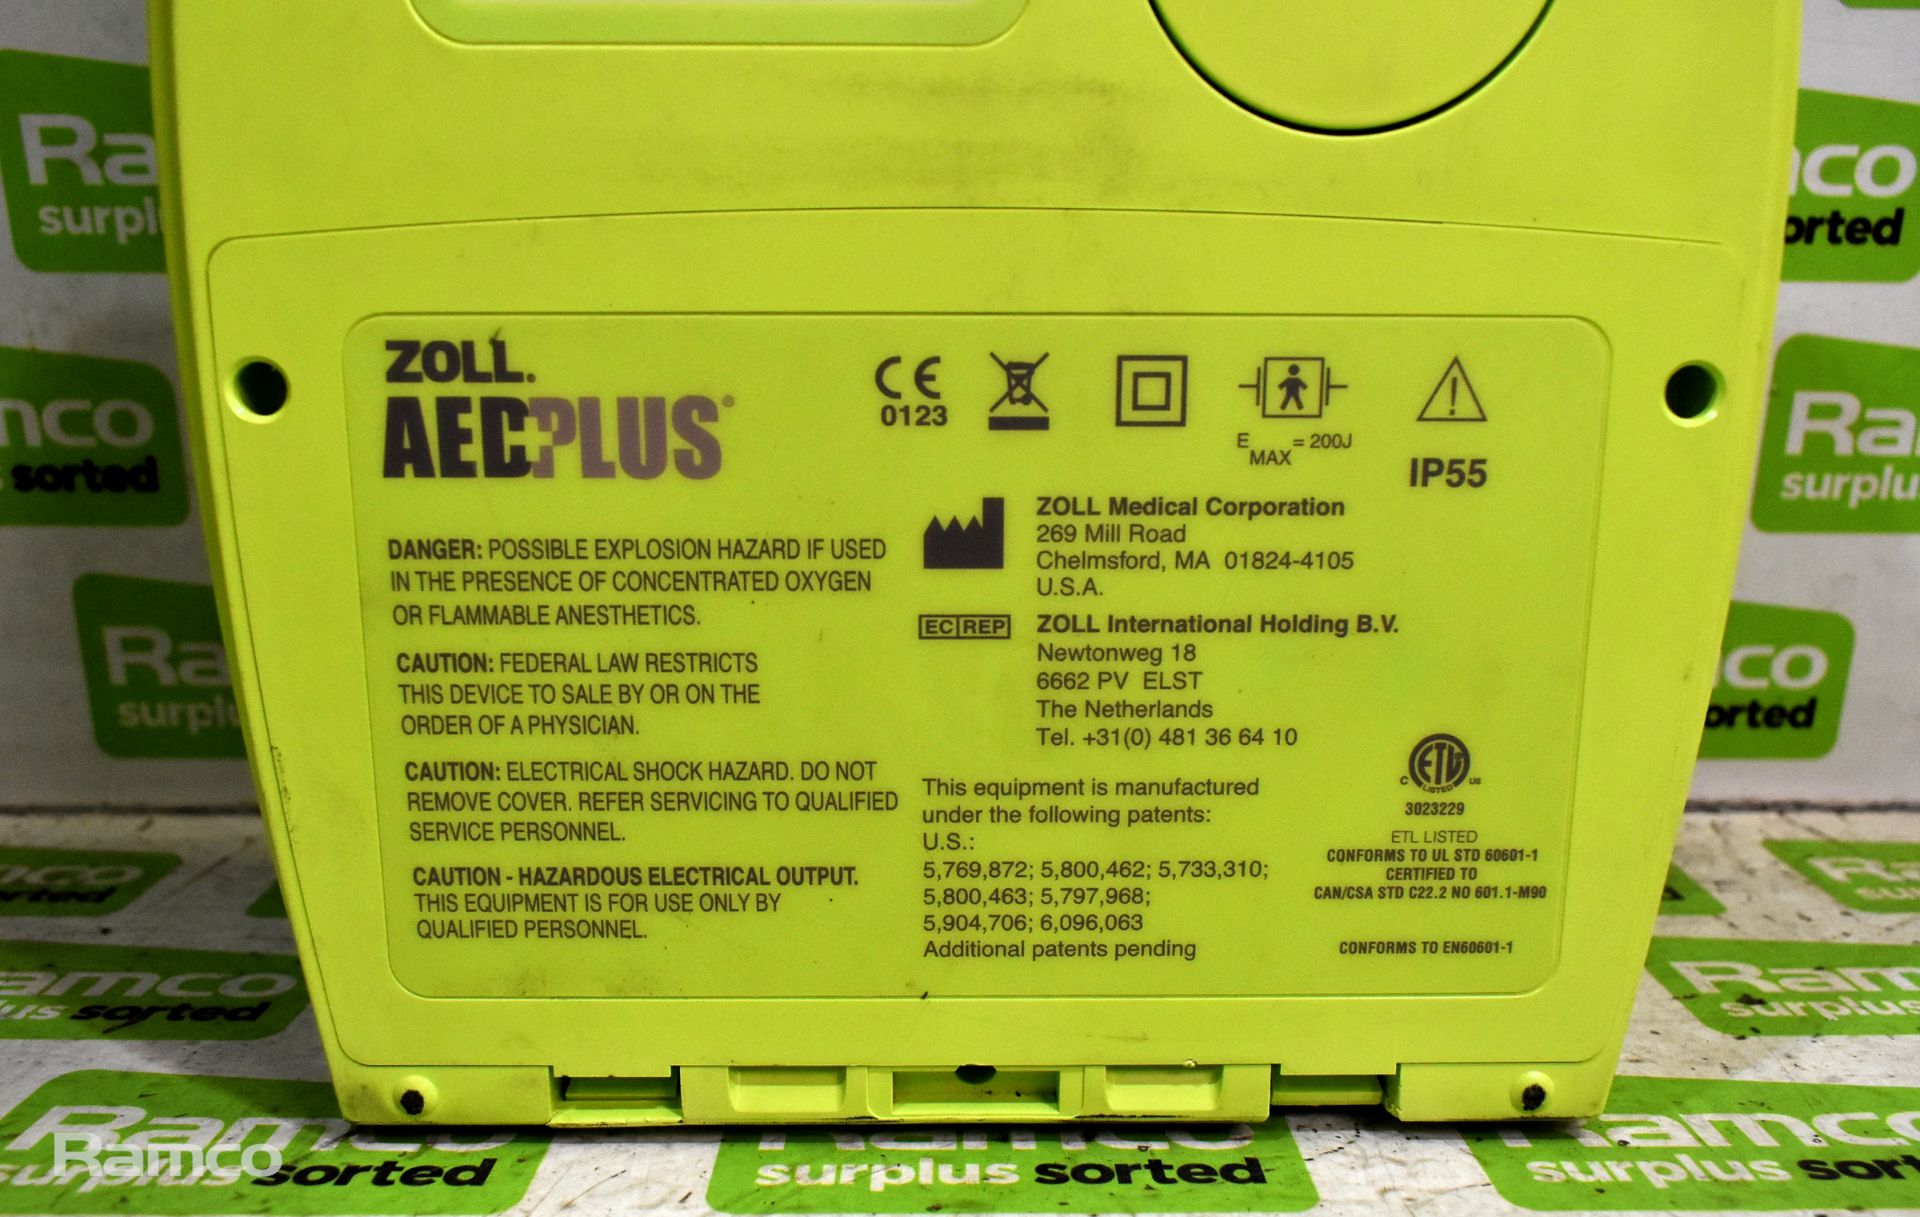 Zoll AED Plus automatic defibrillator - Image 9 of 10